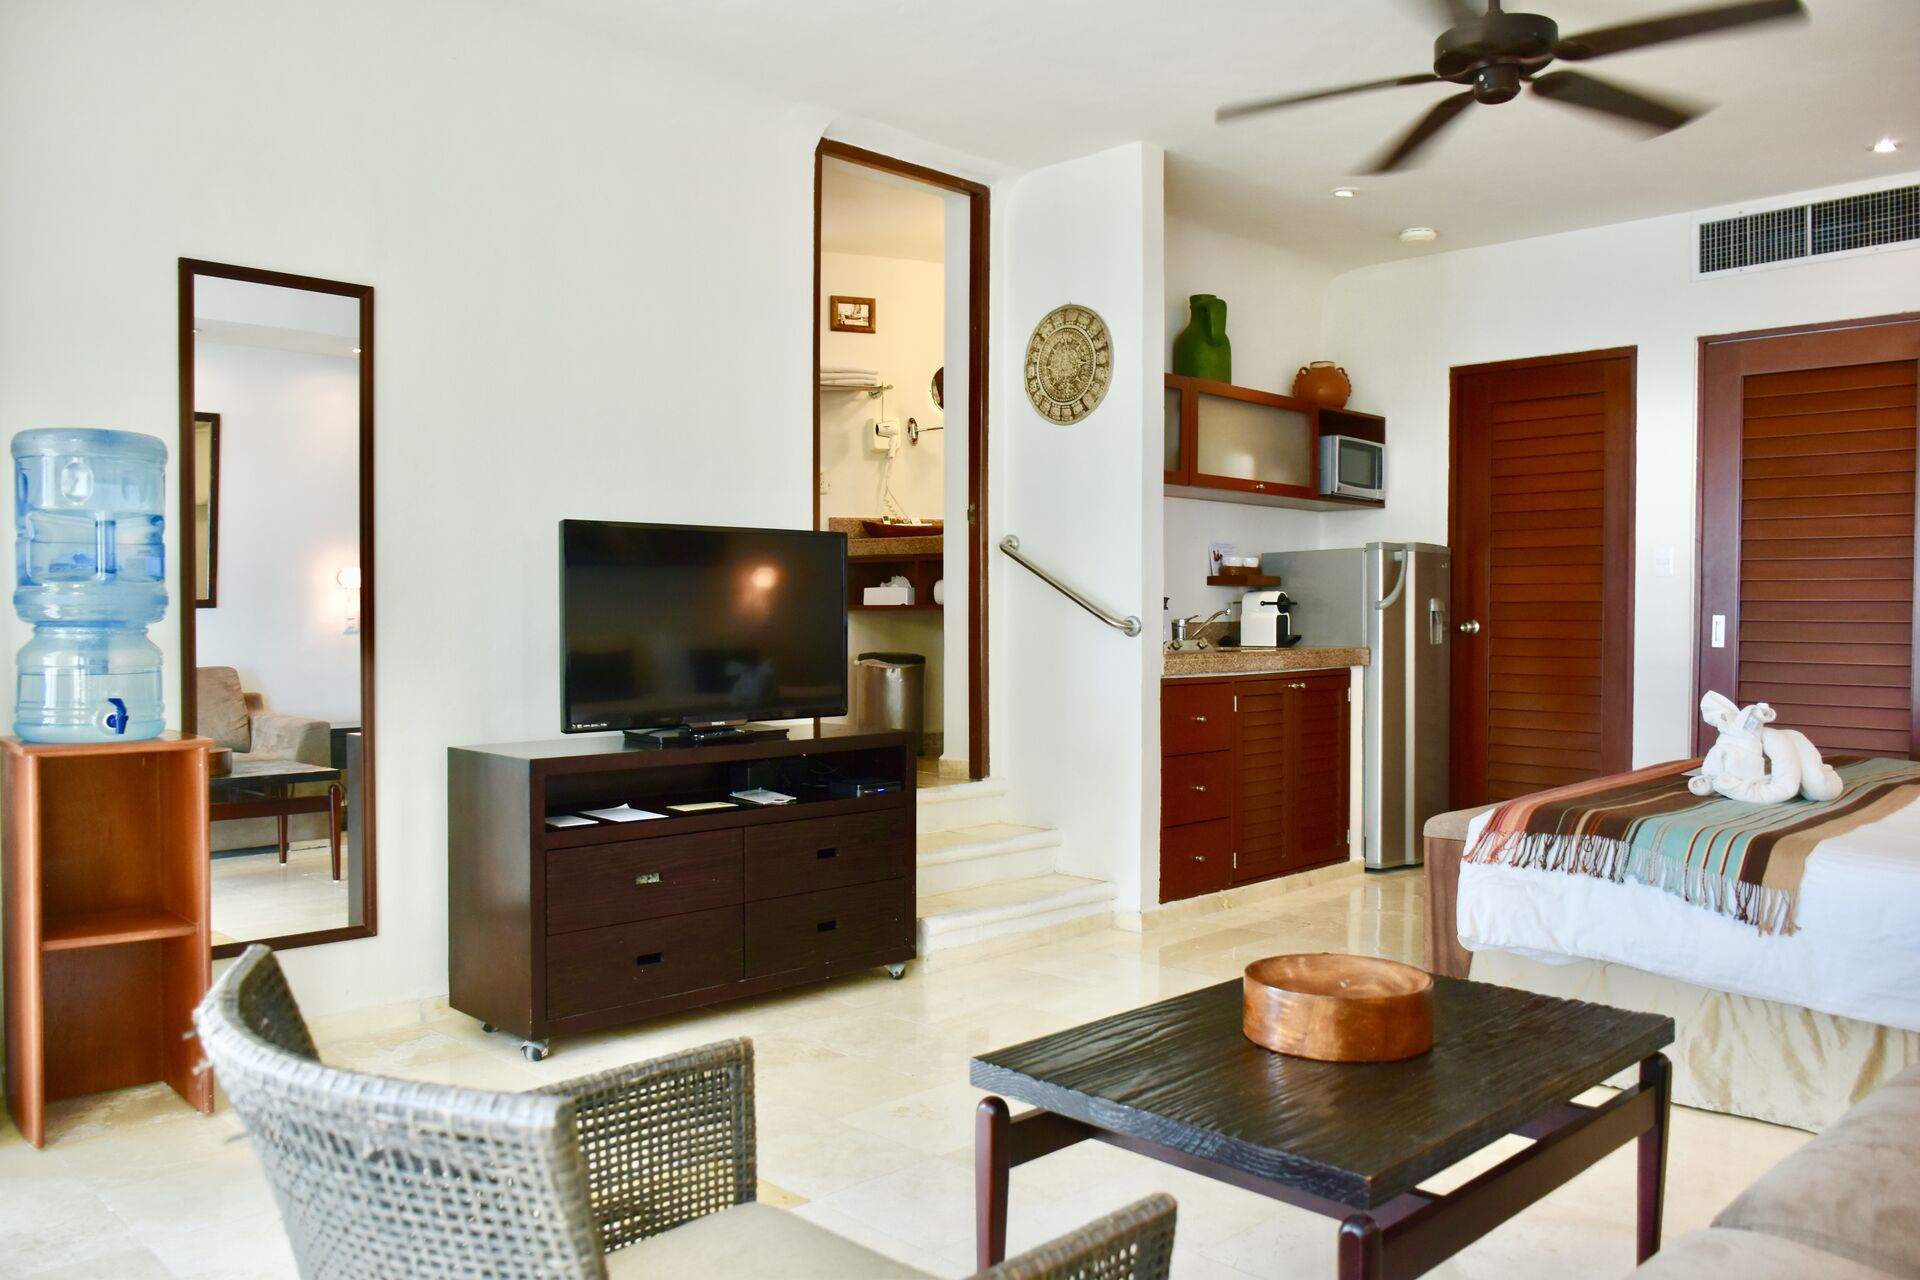 Amazing ocean front studio with queen size bed, sofa bed and kitchenette.